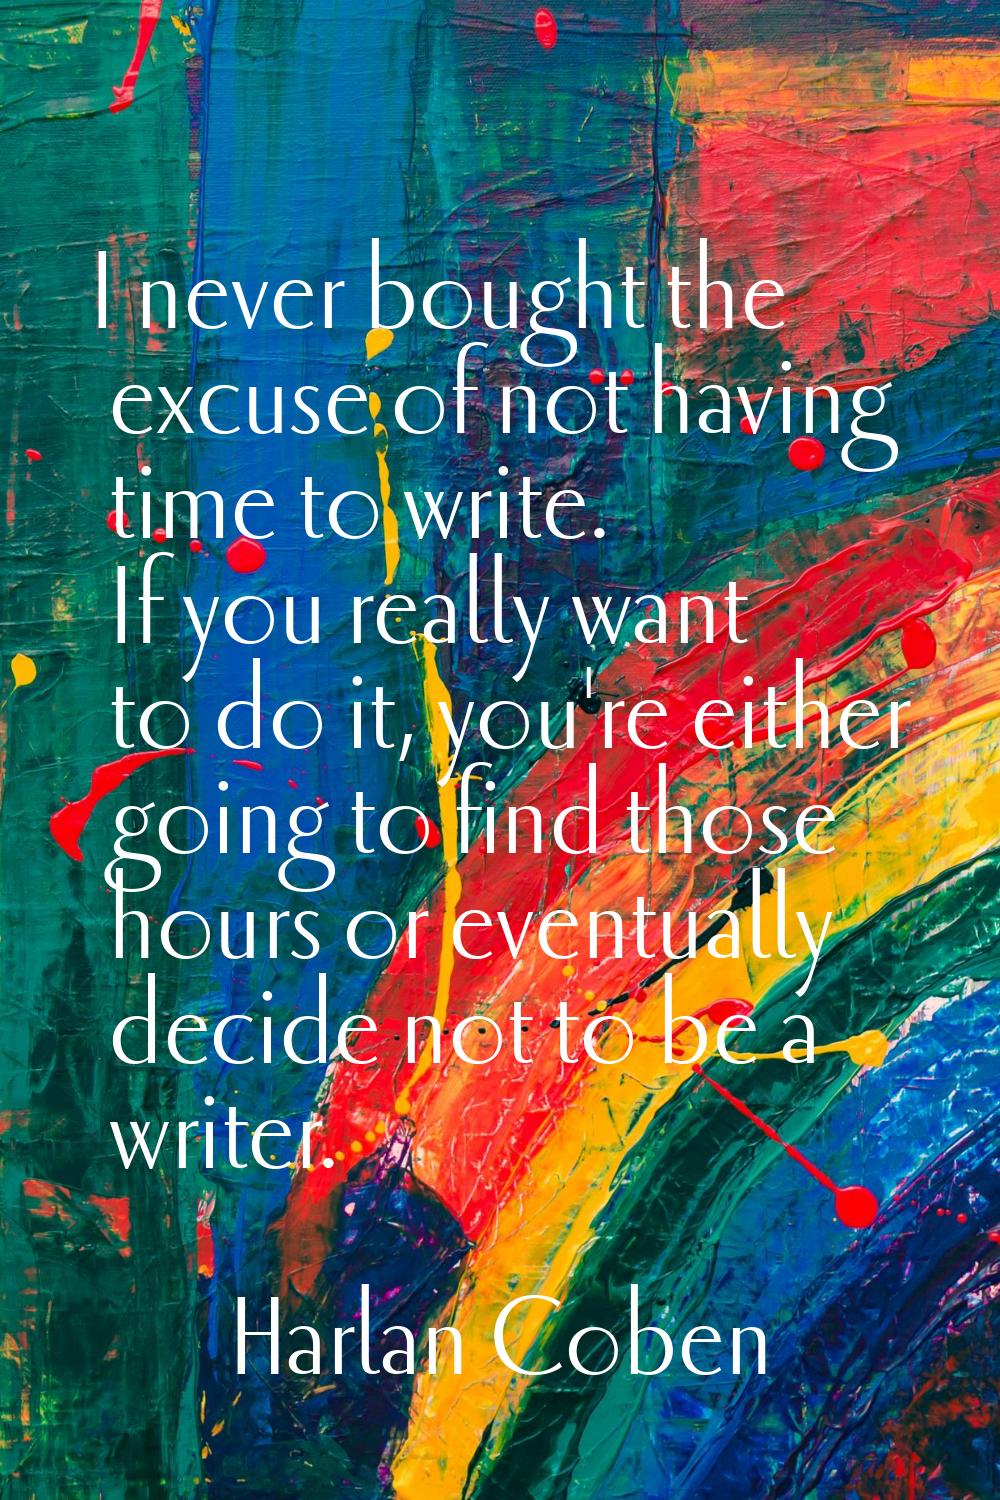 I never bought the excuse of not having time to write. If you really want to do it, you're either g